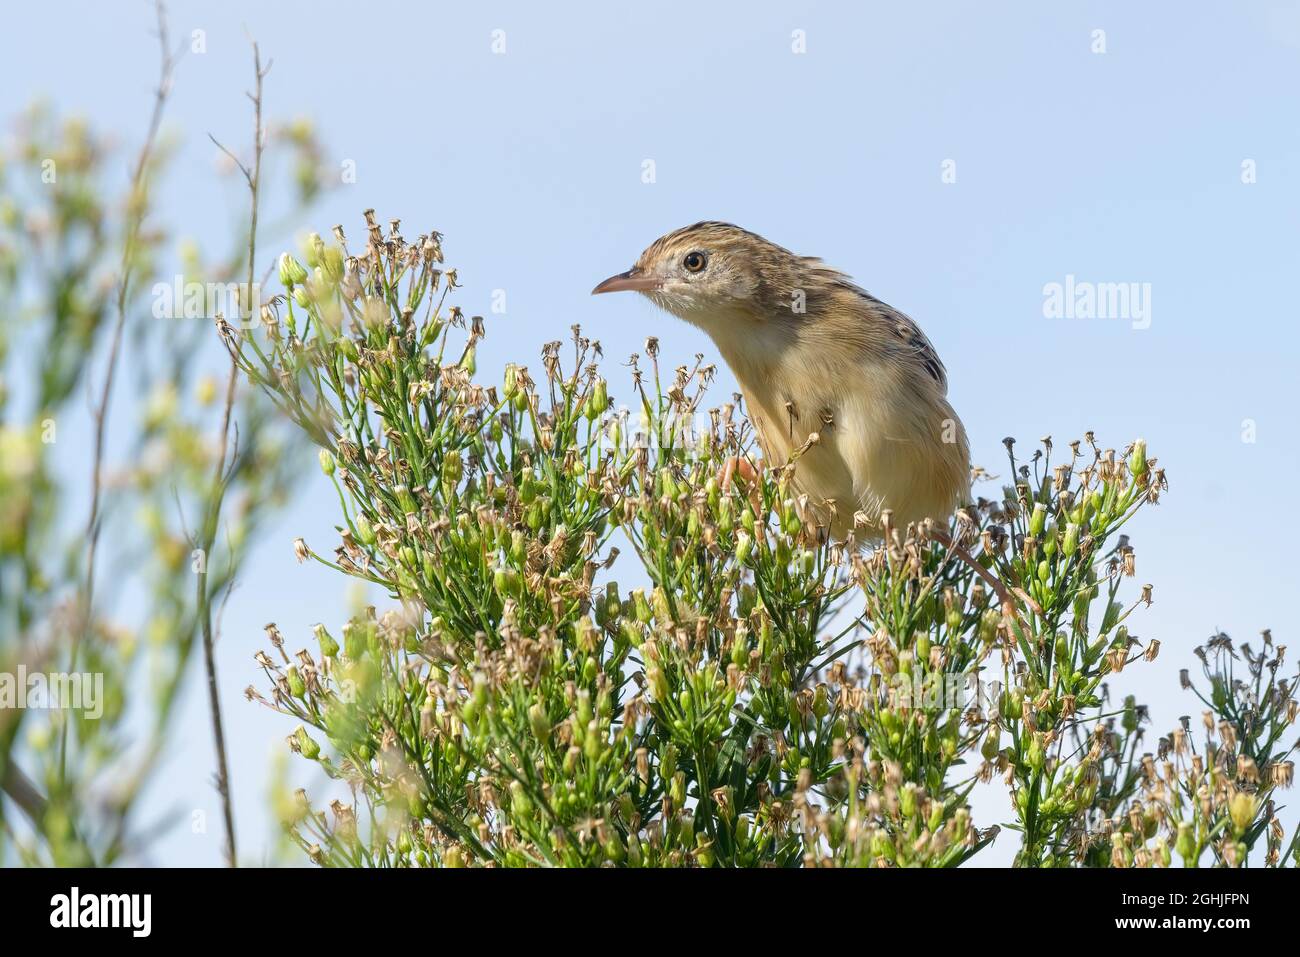 Zitting cisticola Cisticola juncidis on Horseweed plant in Spring south Portugal, Europe Stock Photo